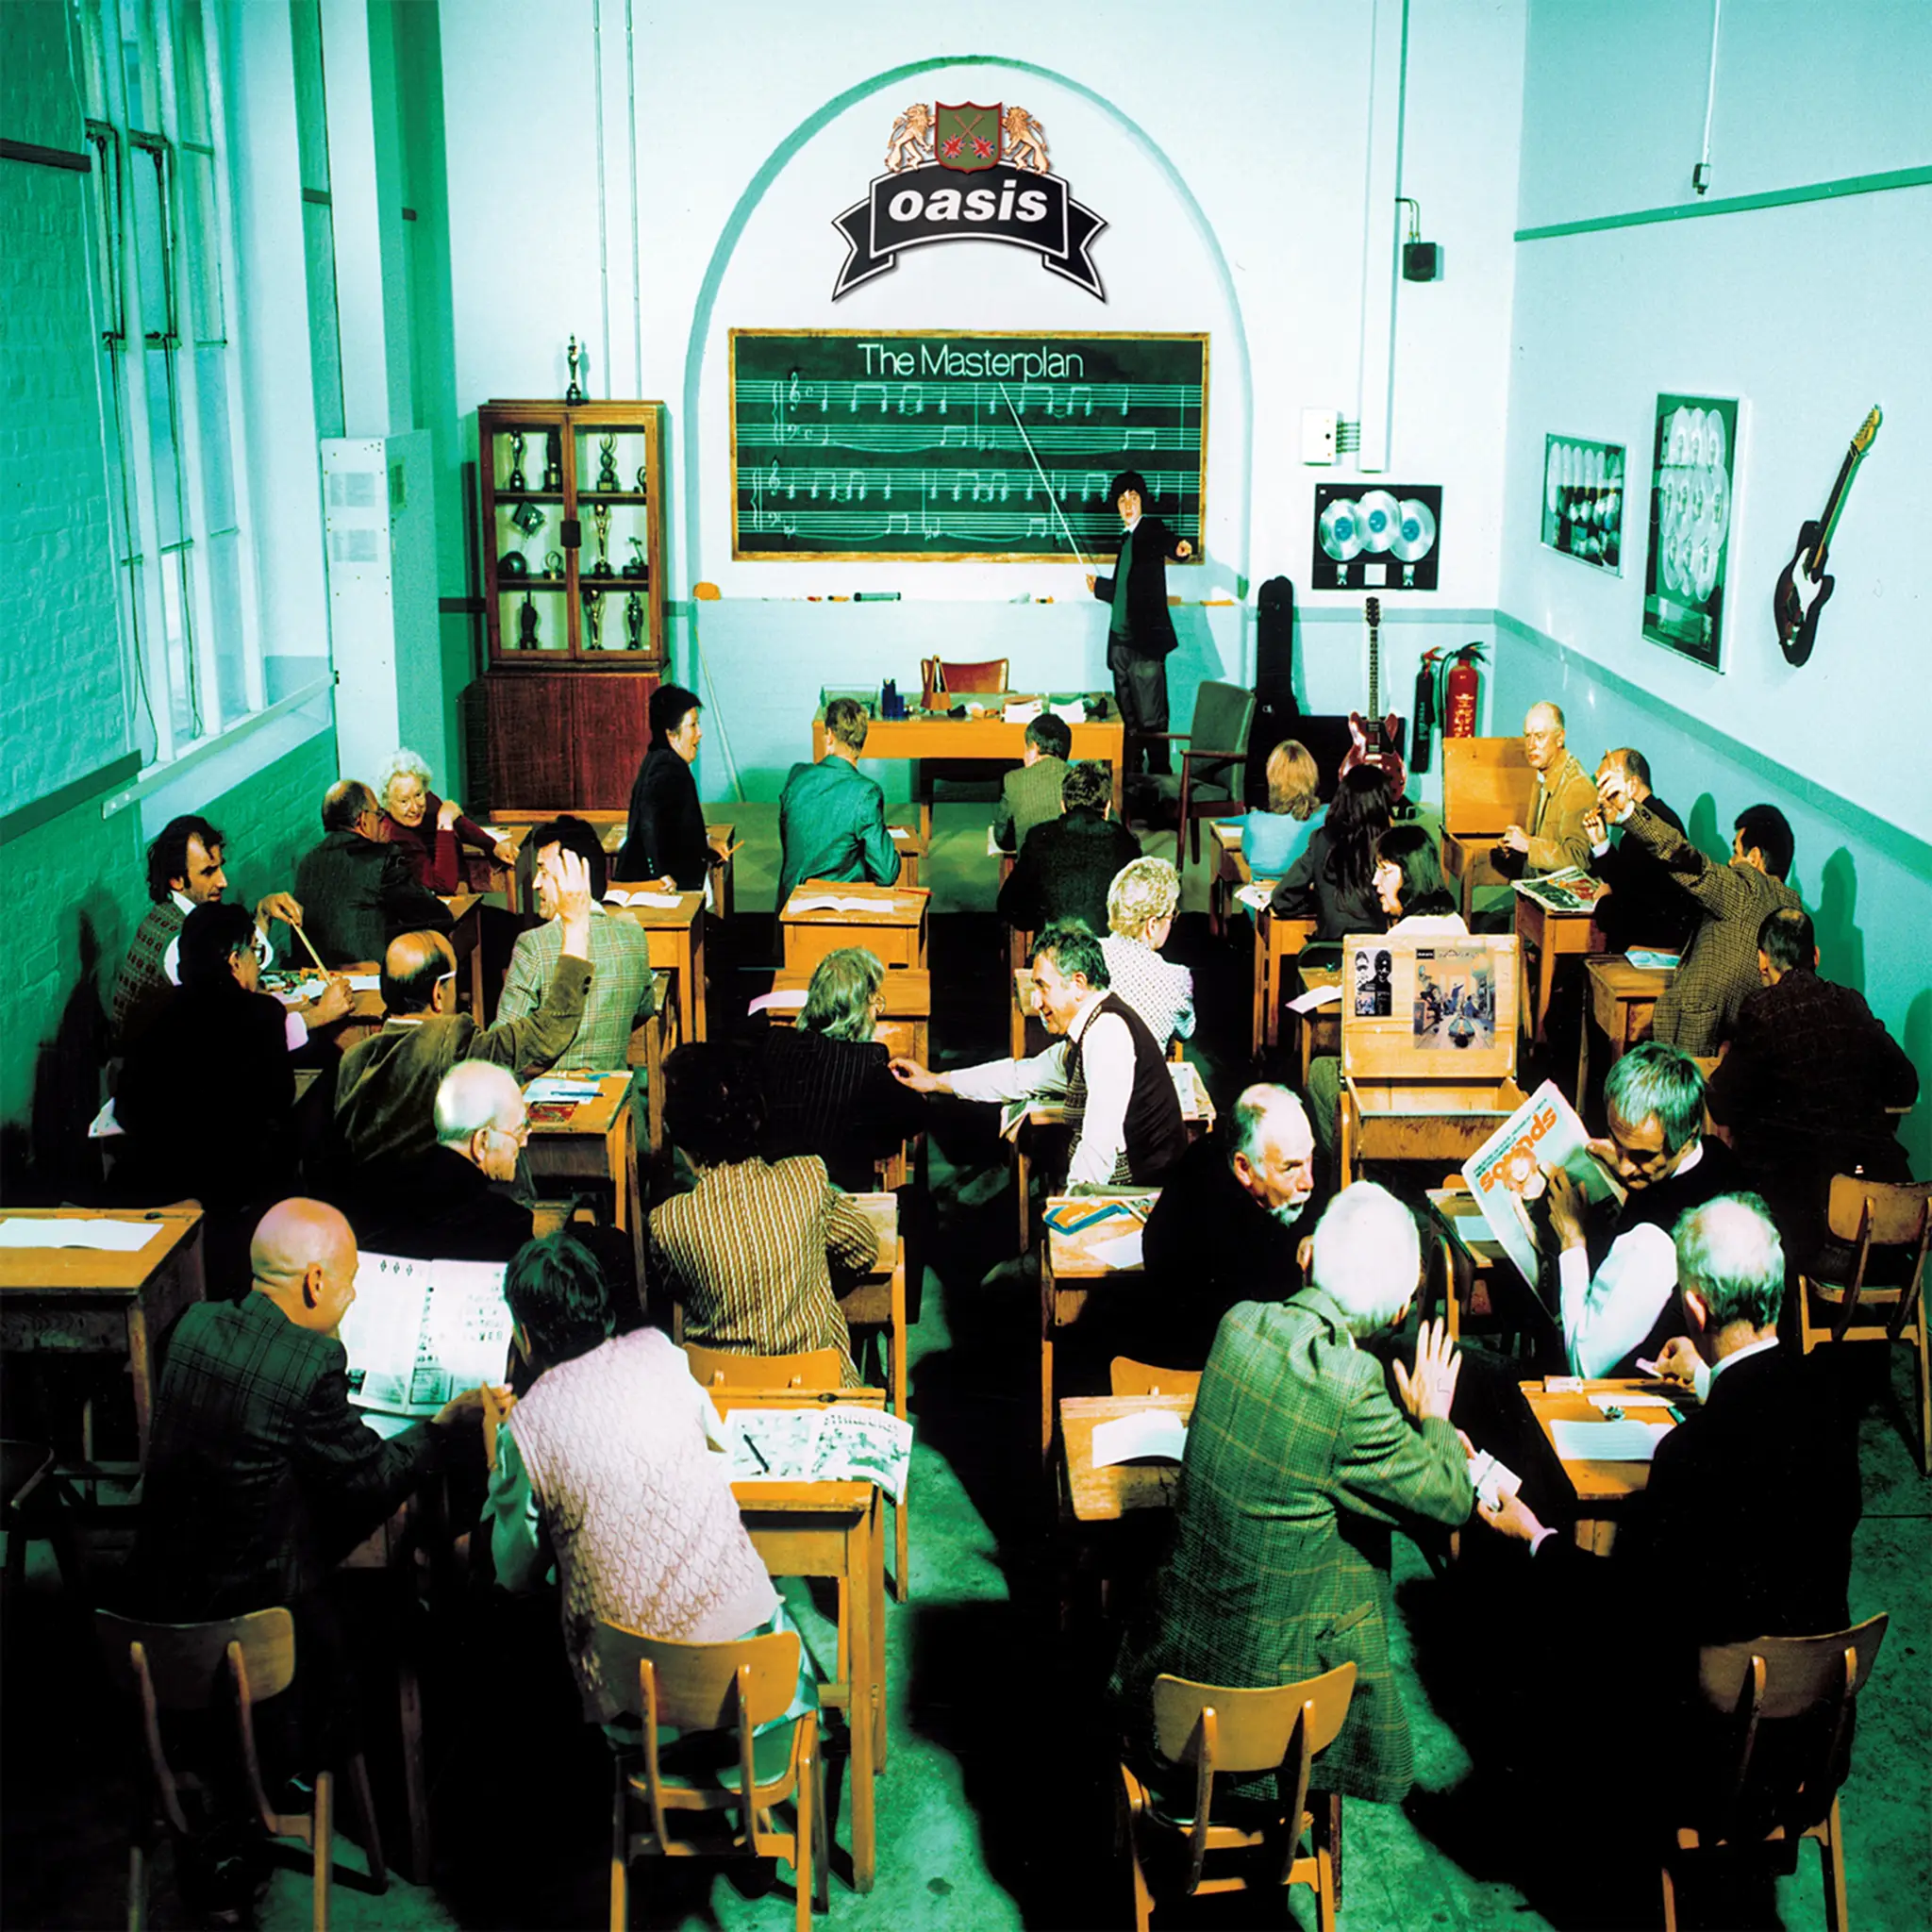 <strong>Oasis - The Masterplan</strong> (Vinyl LP - silver)